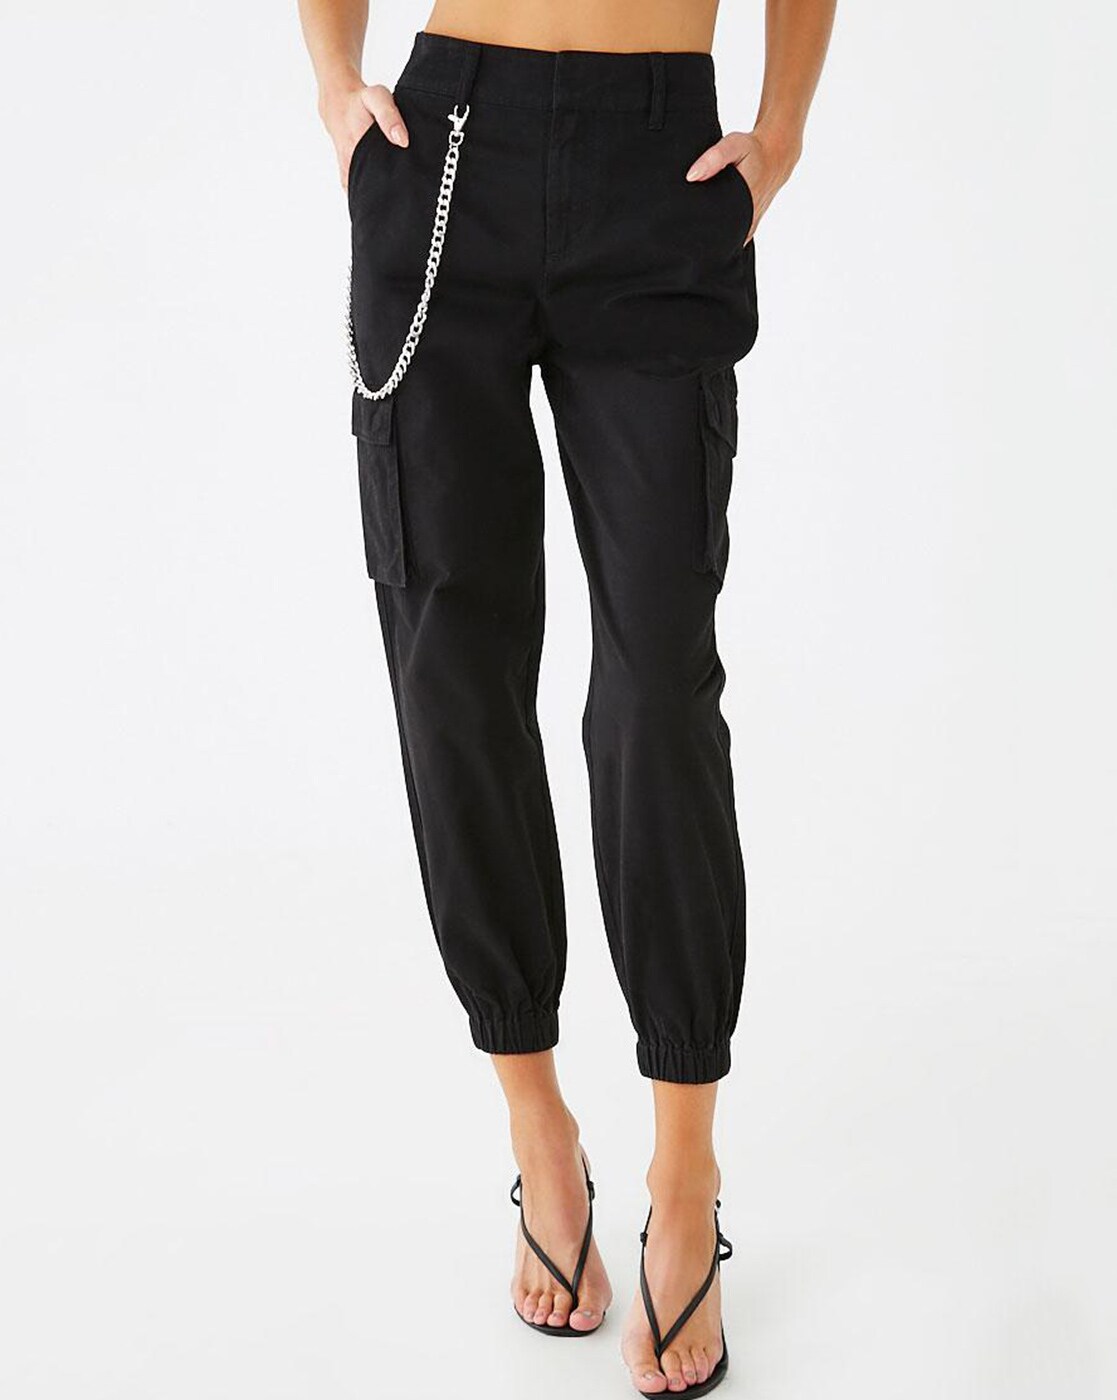 Buy Black Cargo Pants With Chain Online in India  Etsy